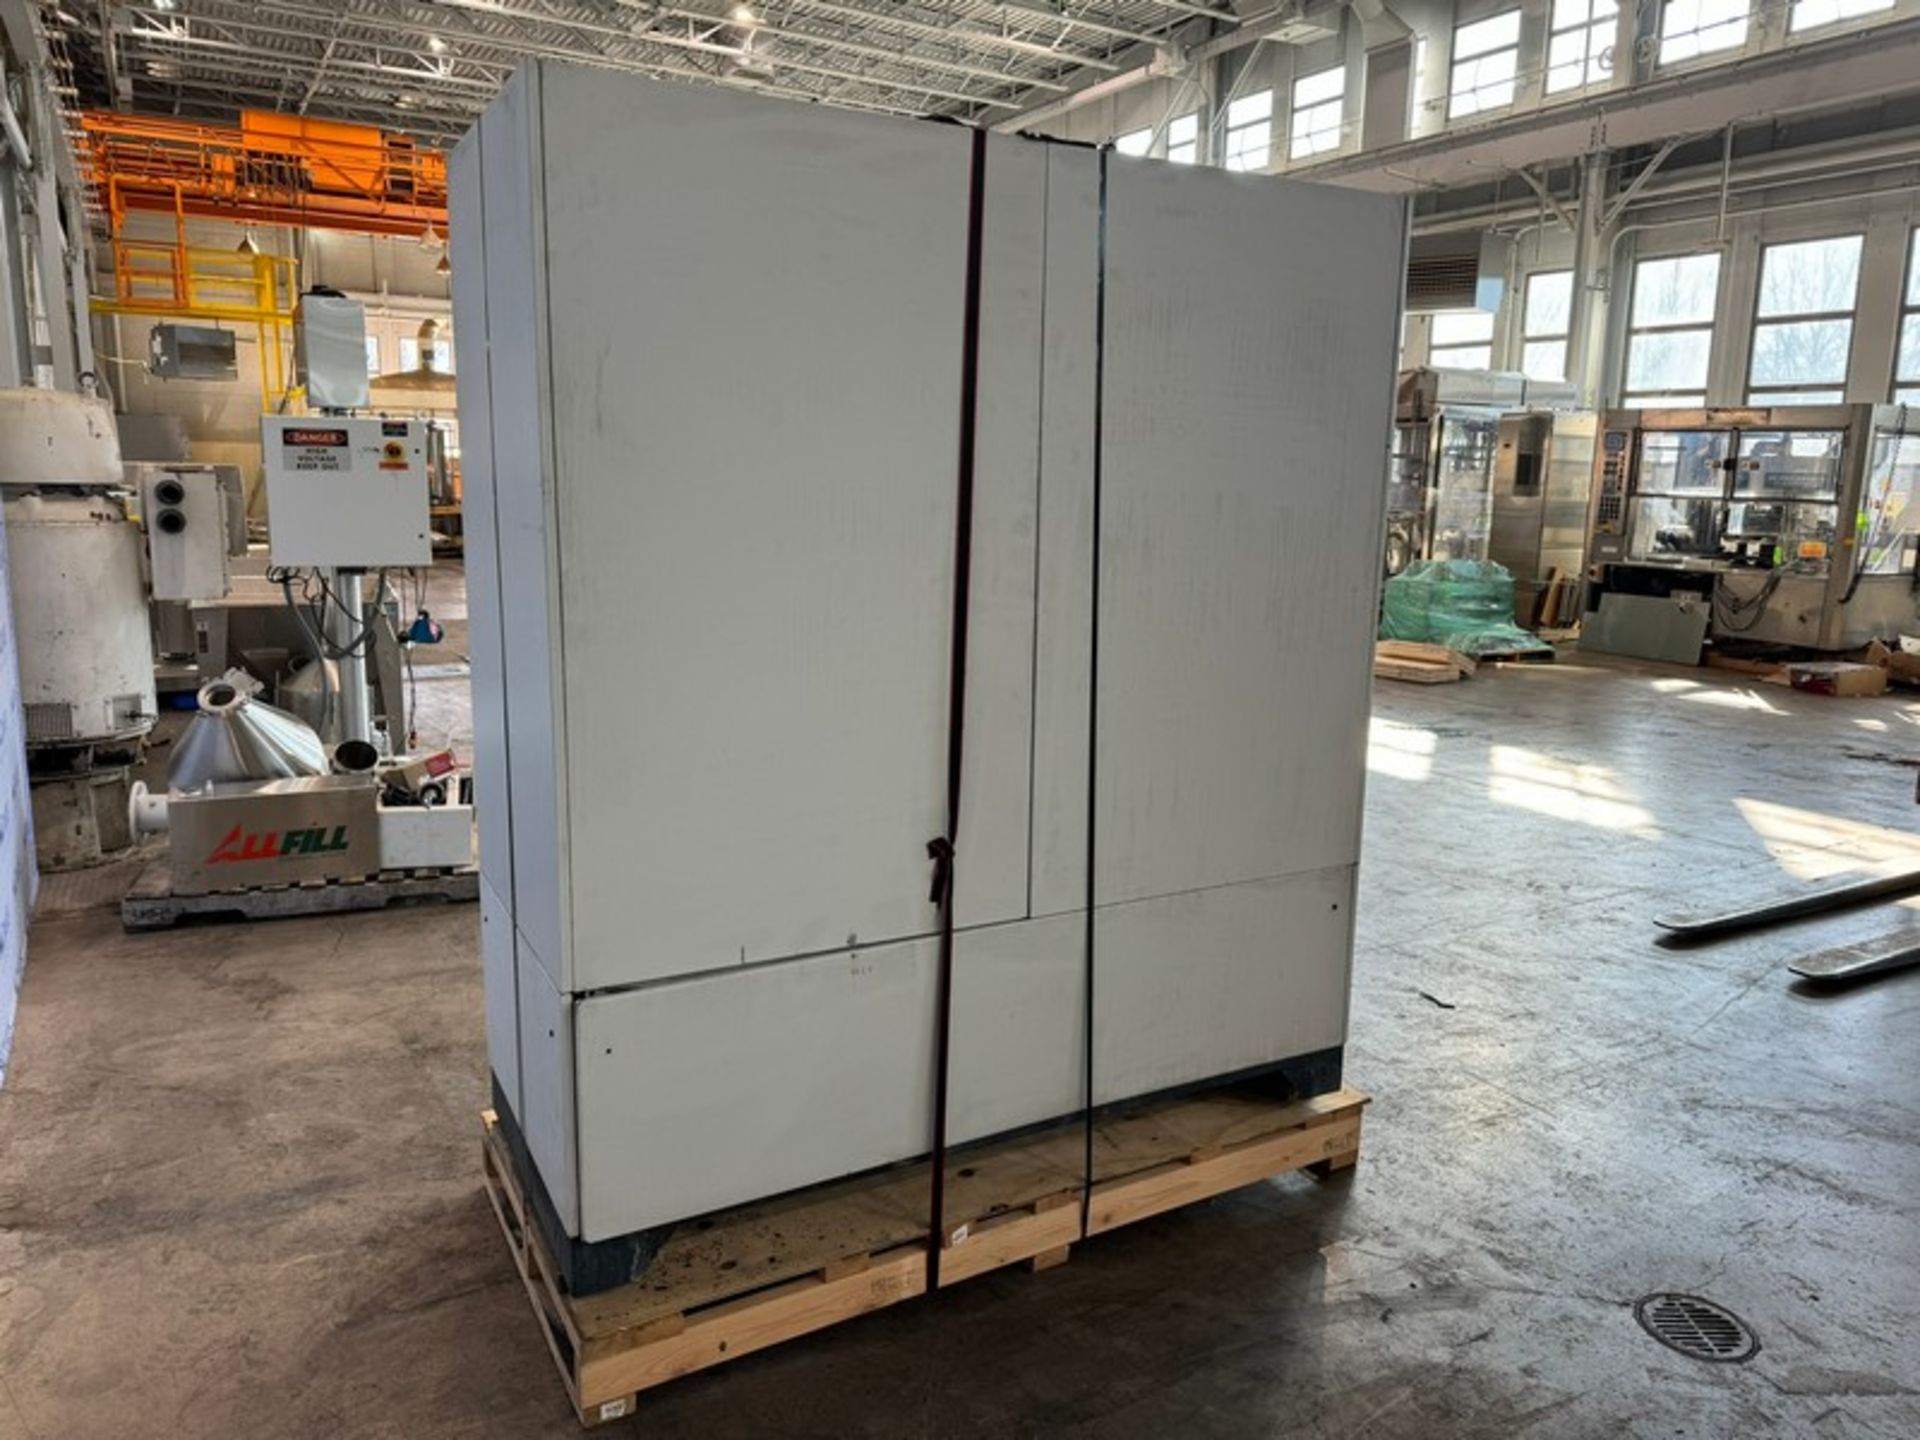 2017 KKT Chiller, Type: CBOXX90, S/N 90901498, 460 Volts, 3 Phase(INV#102931) (Located @ the MDG - Image 3 of 6